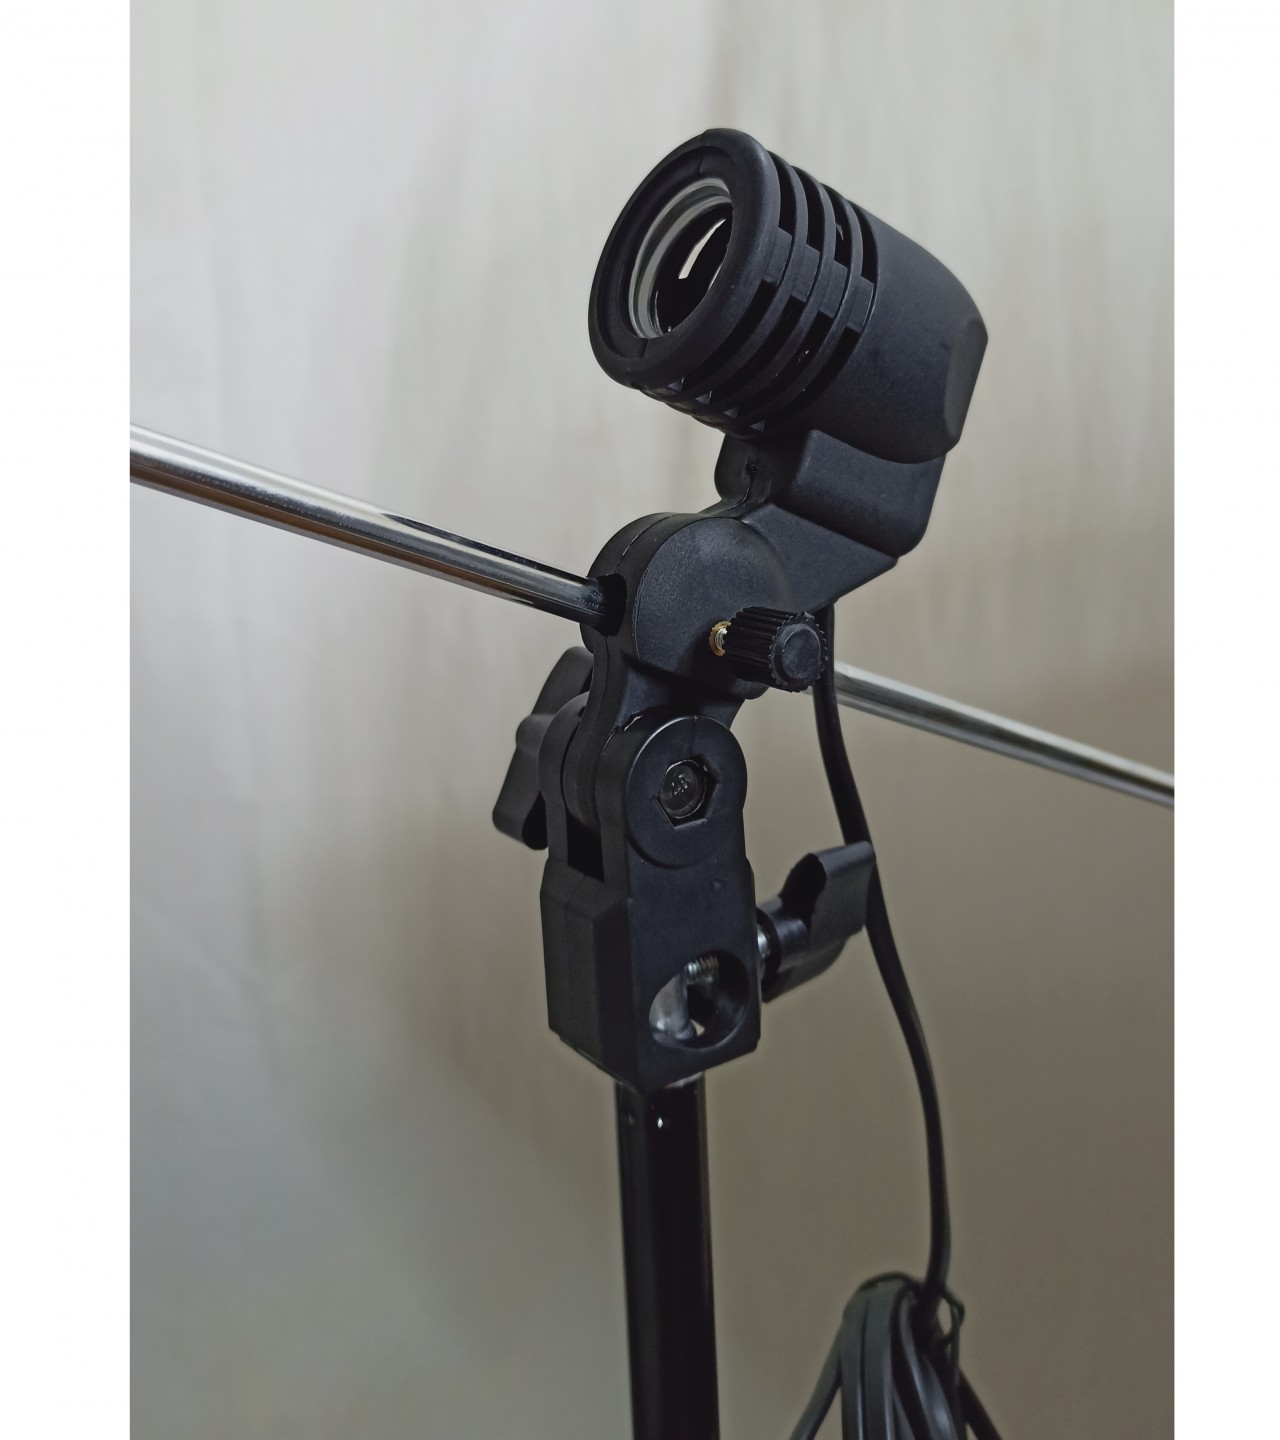 Black Reflective Umbrella continuous Lights setup pair for photography and video shooting